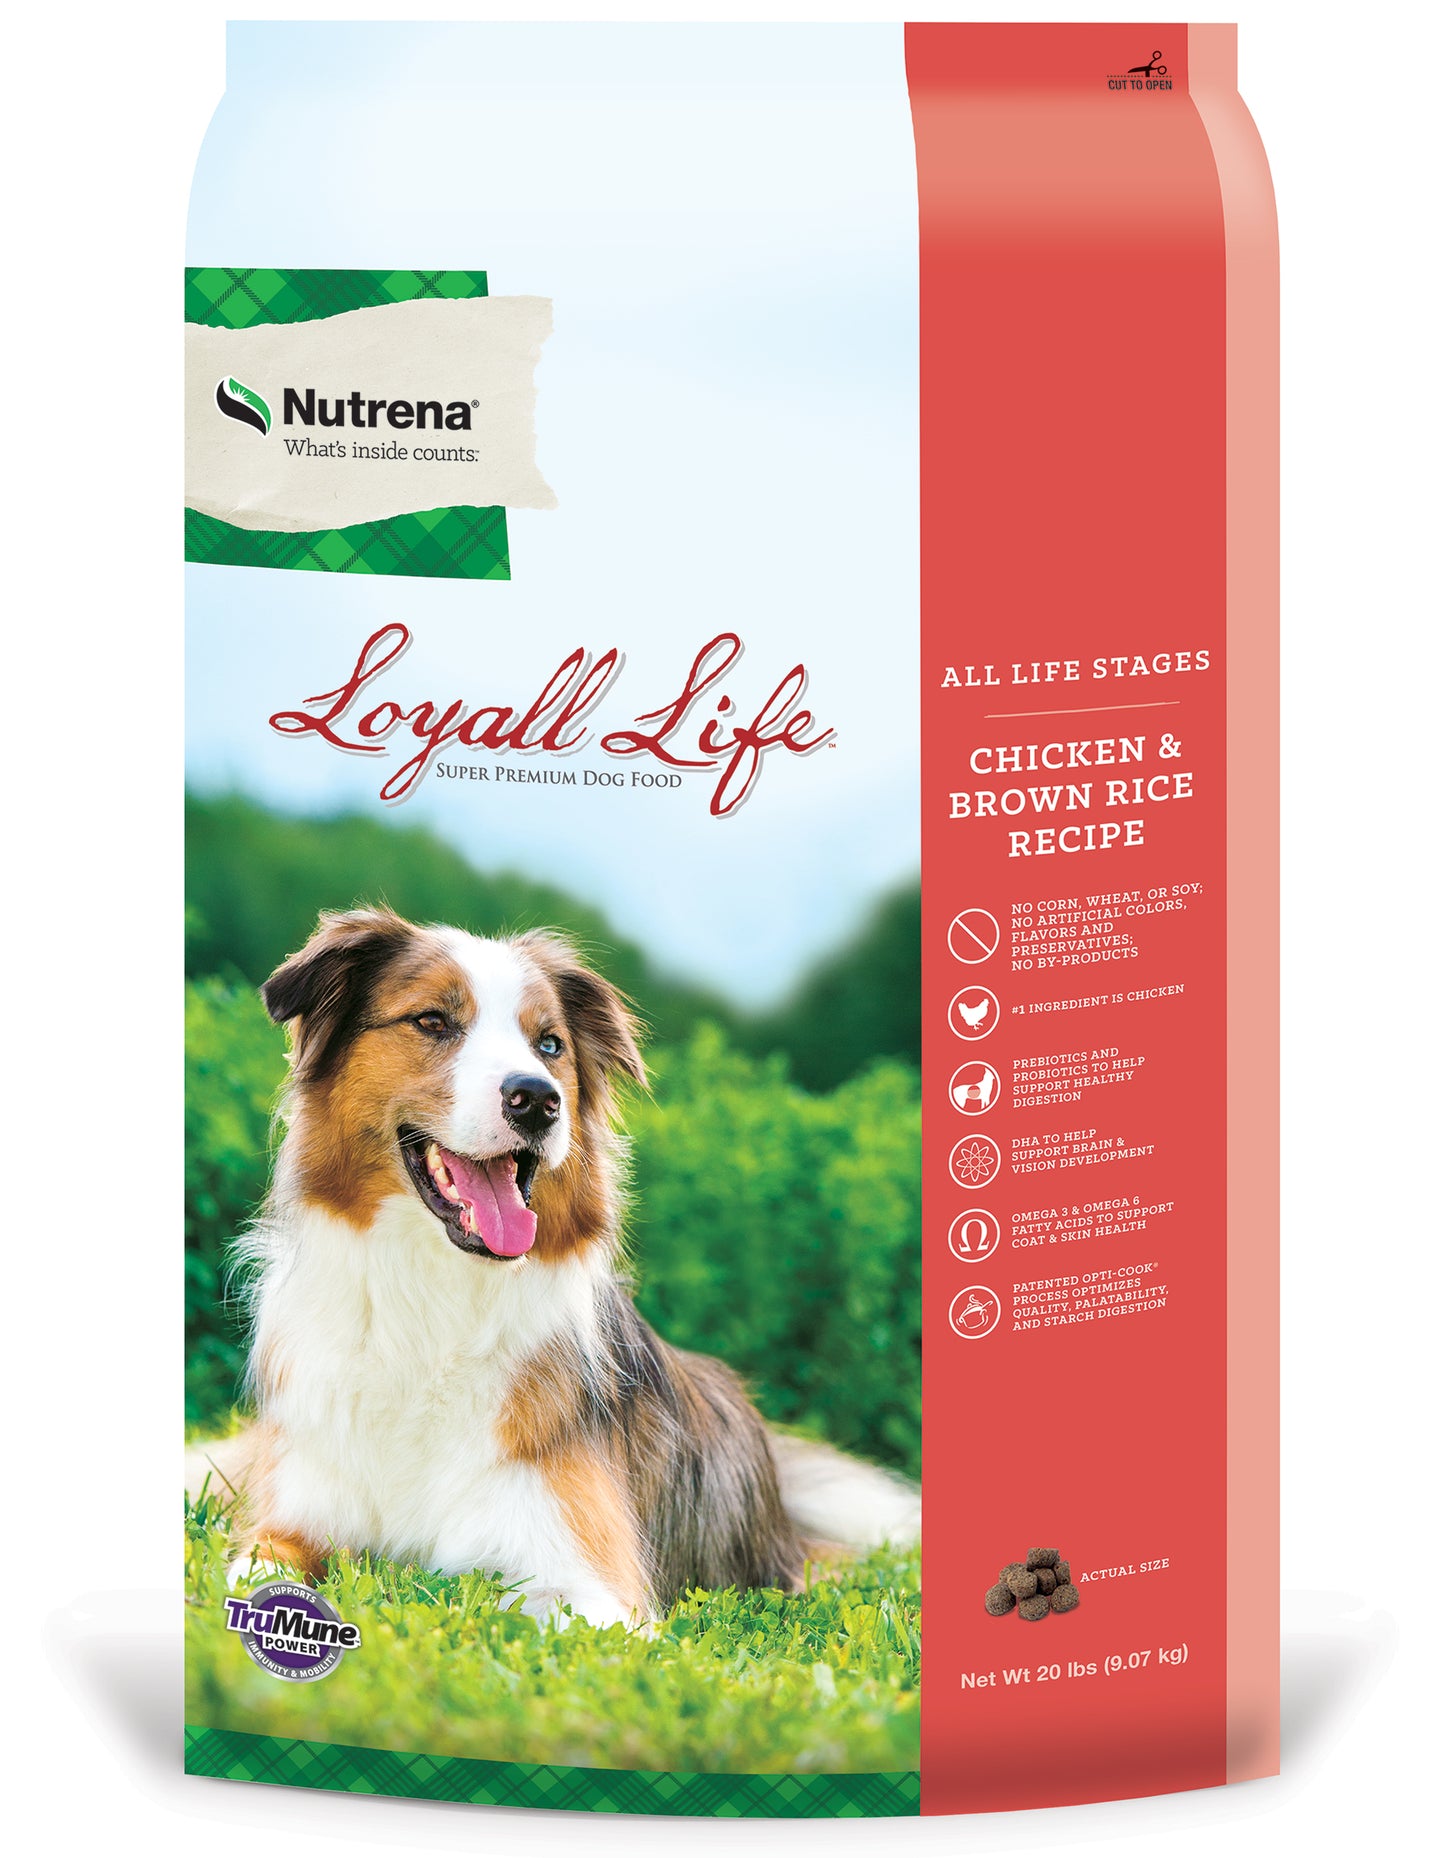 Loyall Life All Life Stages Chicken & Brown Rice